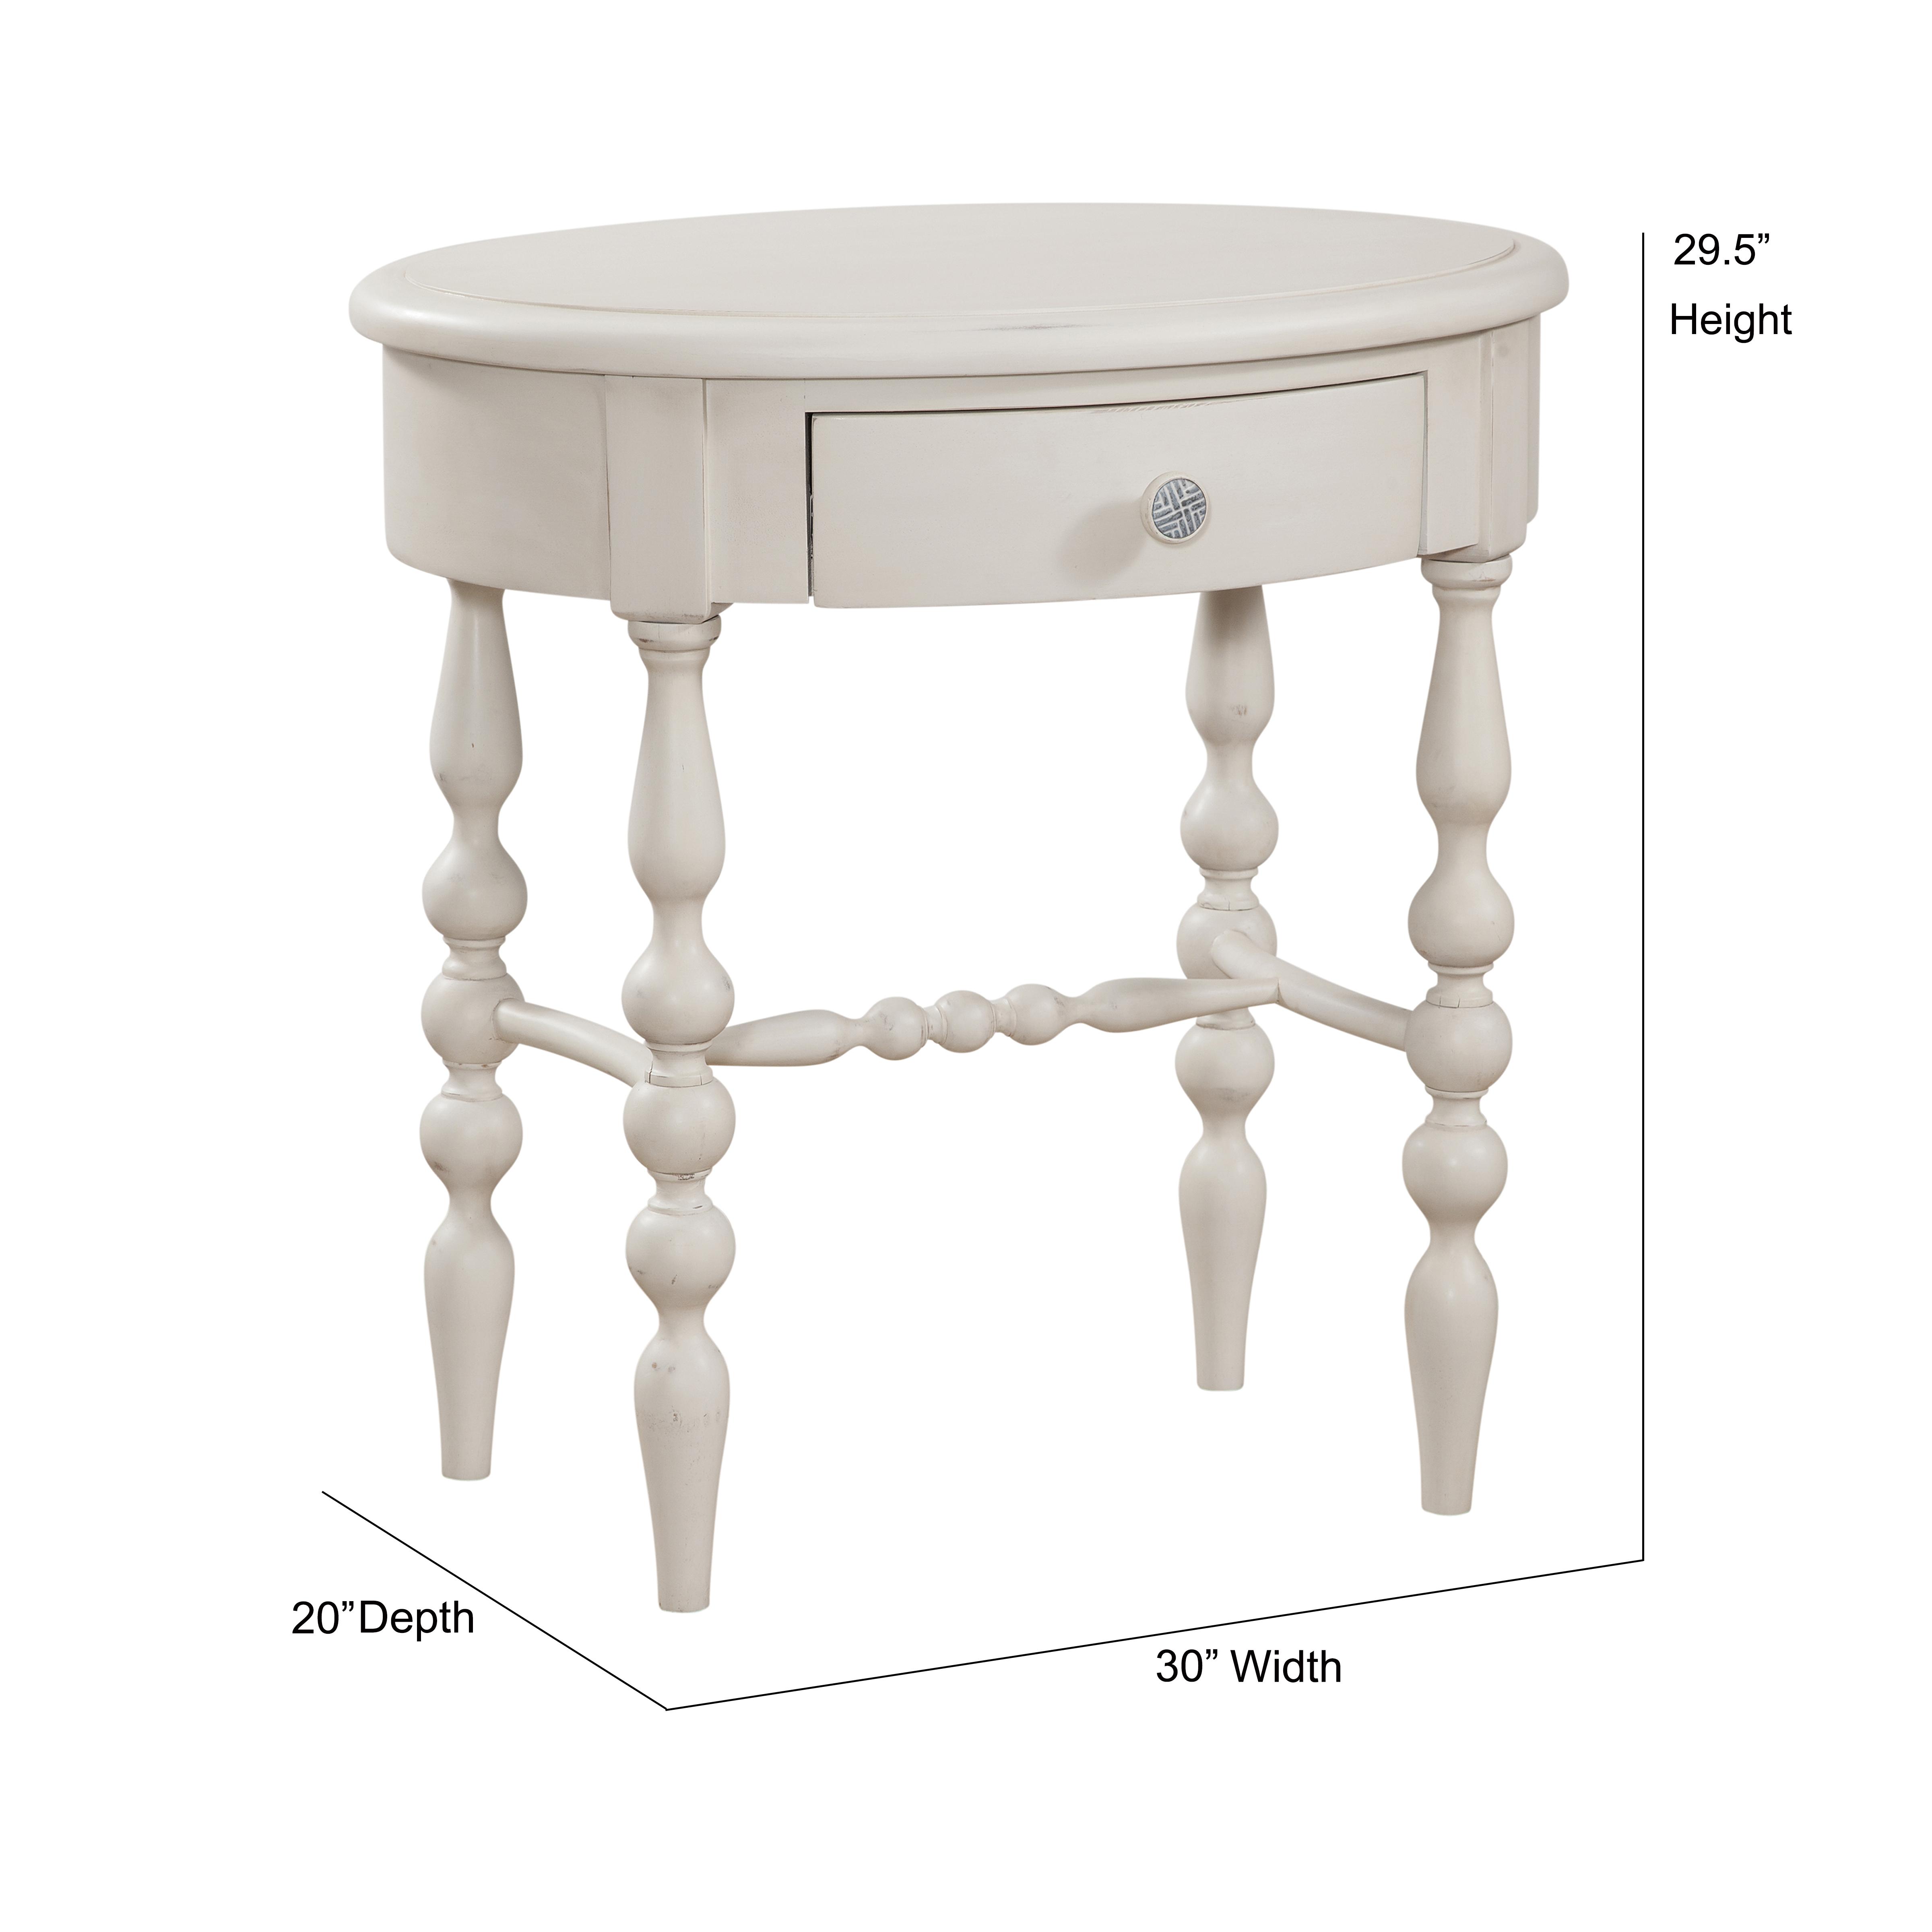 American Woodcrafters Rodanthe 3910-410 Accent Table